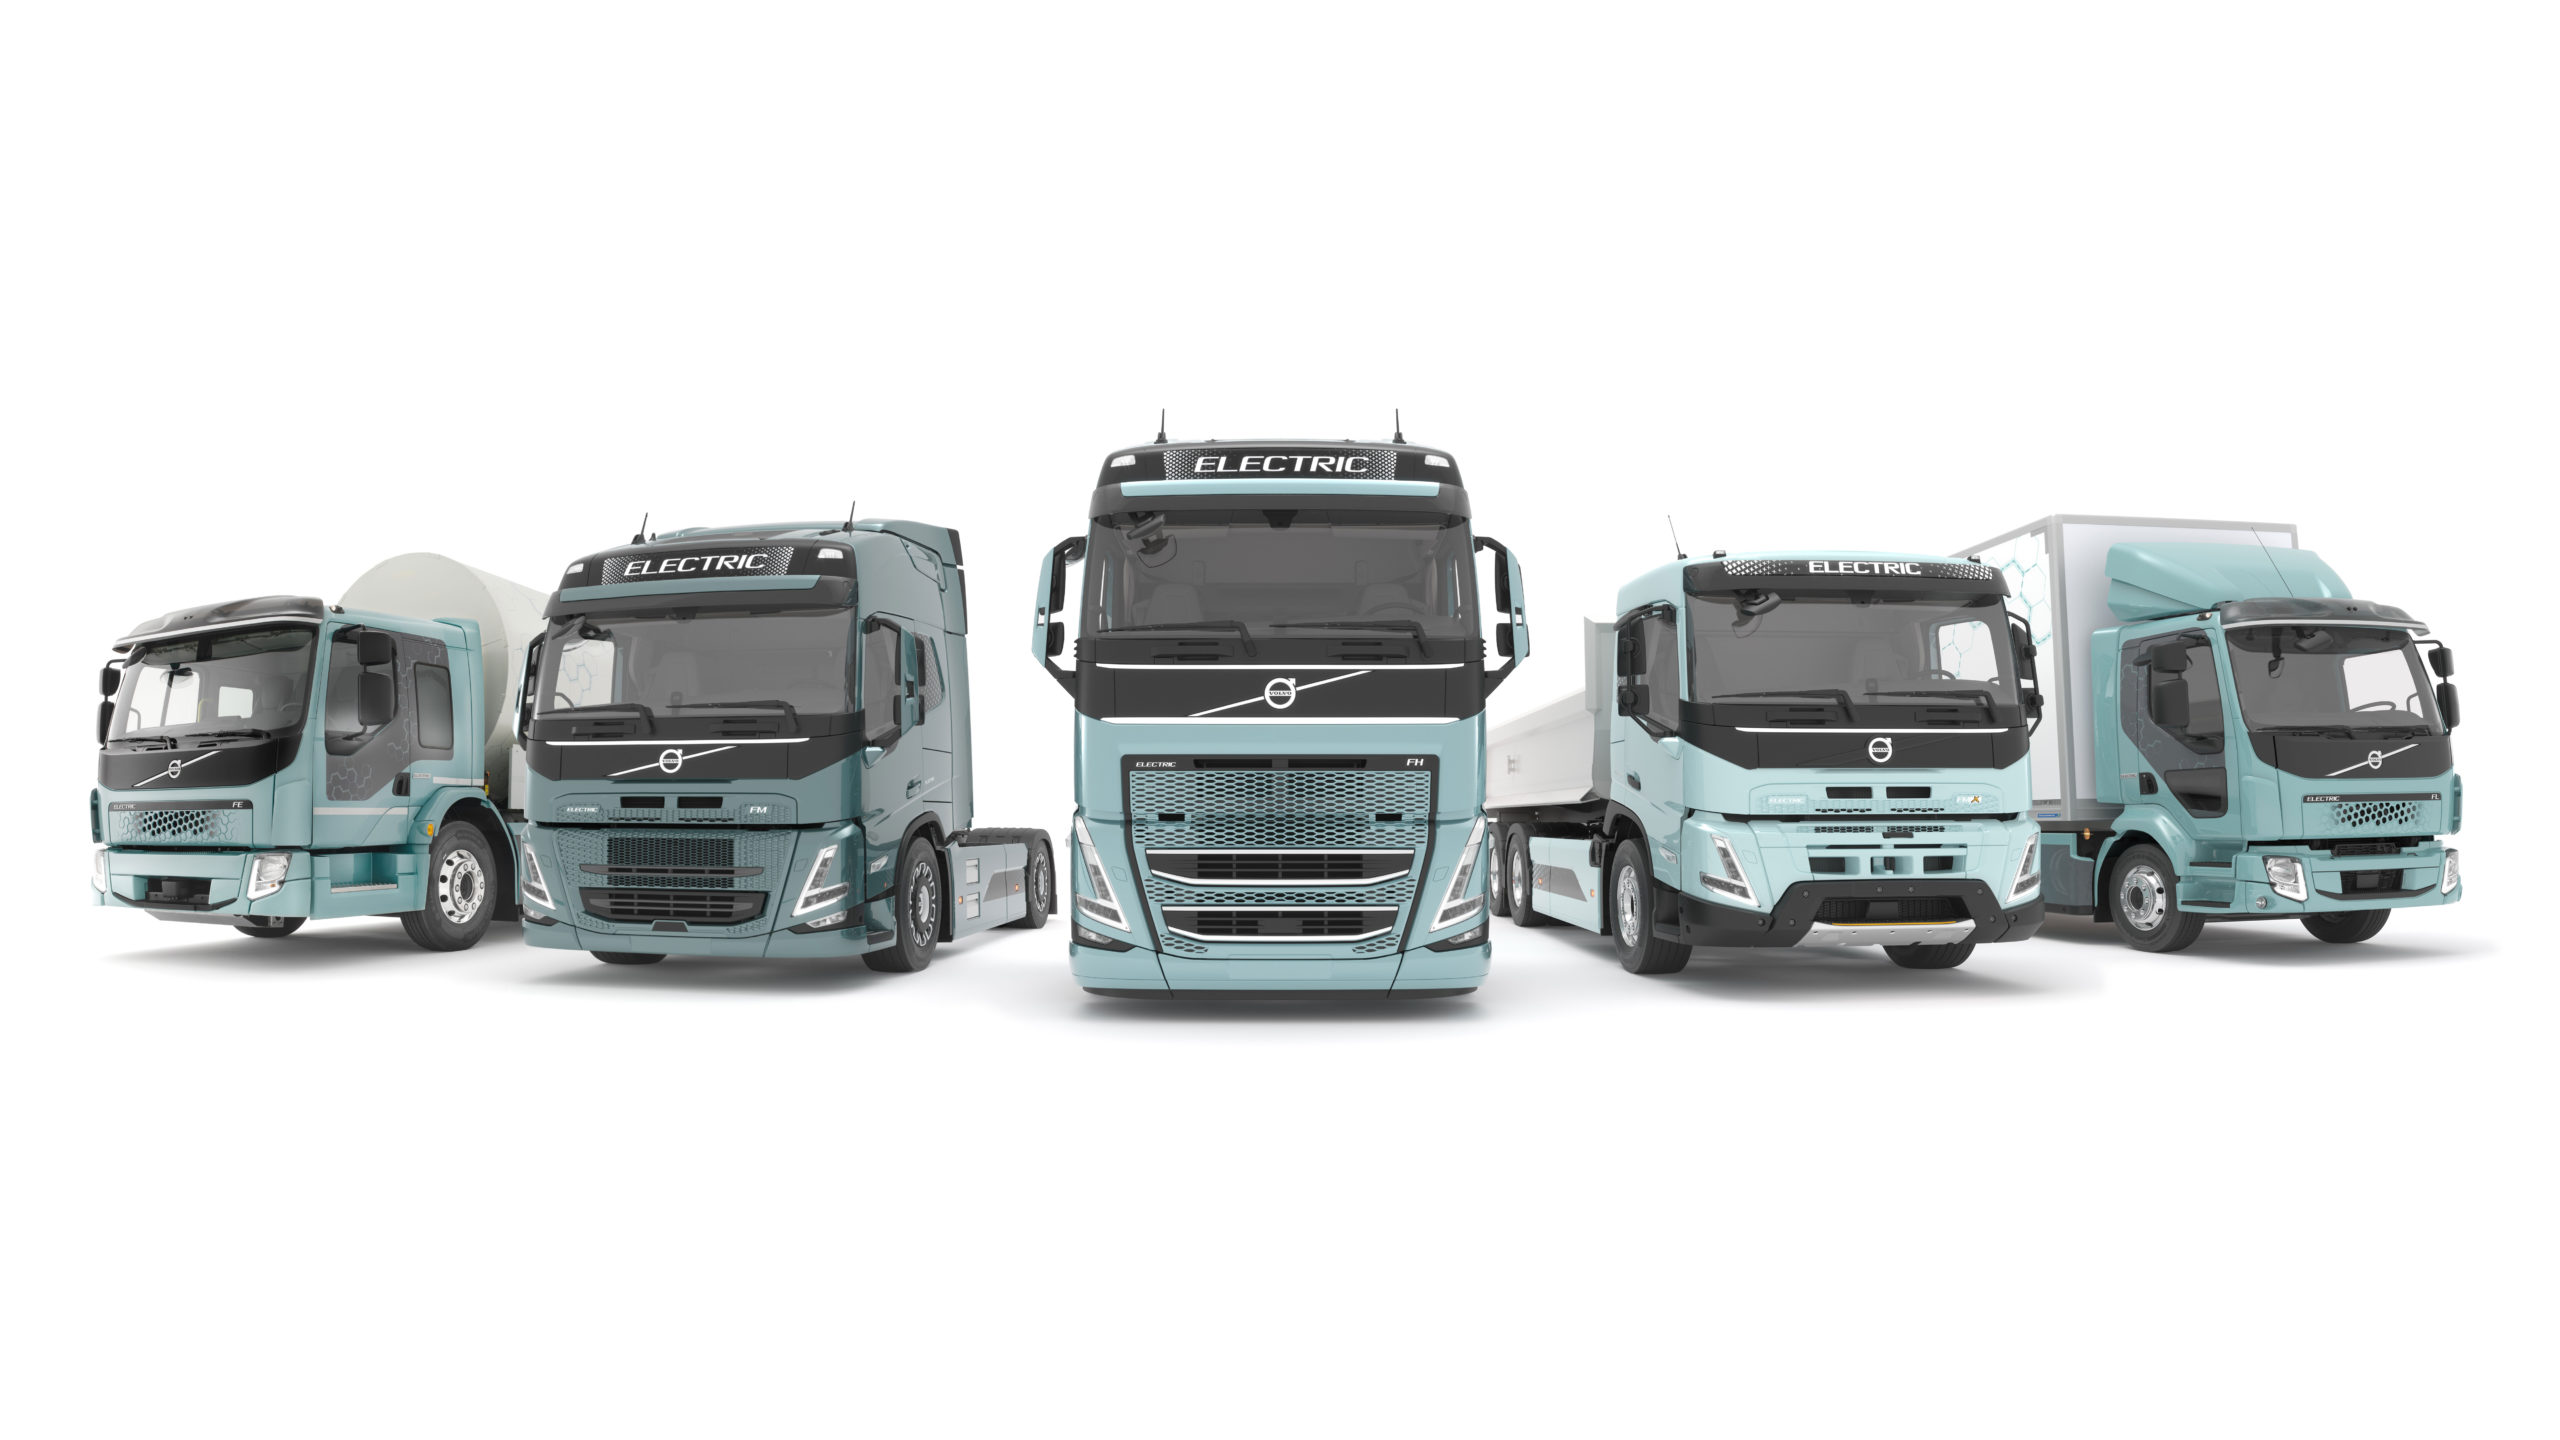 Volvo Trucks is launching a full range of electric trucks in Europe in 2021.